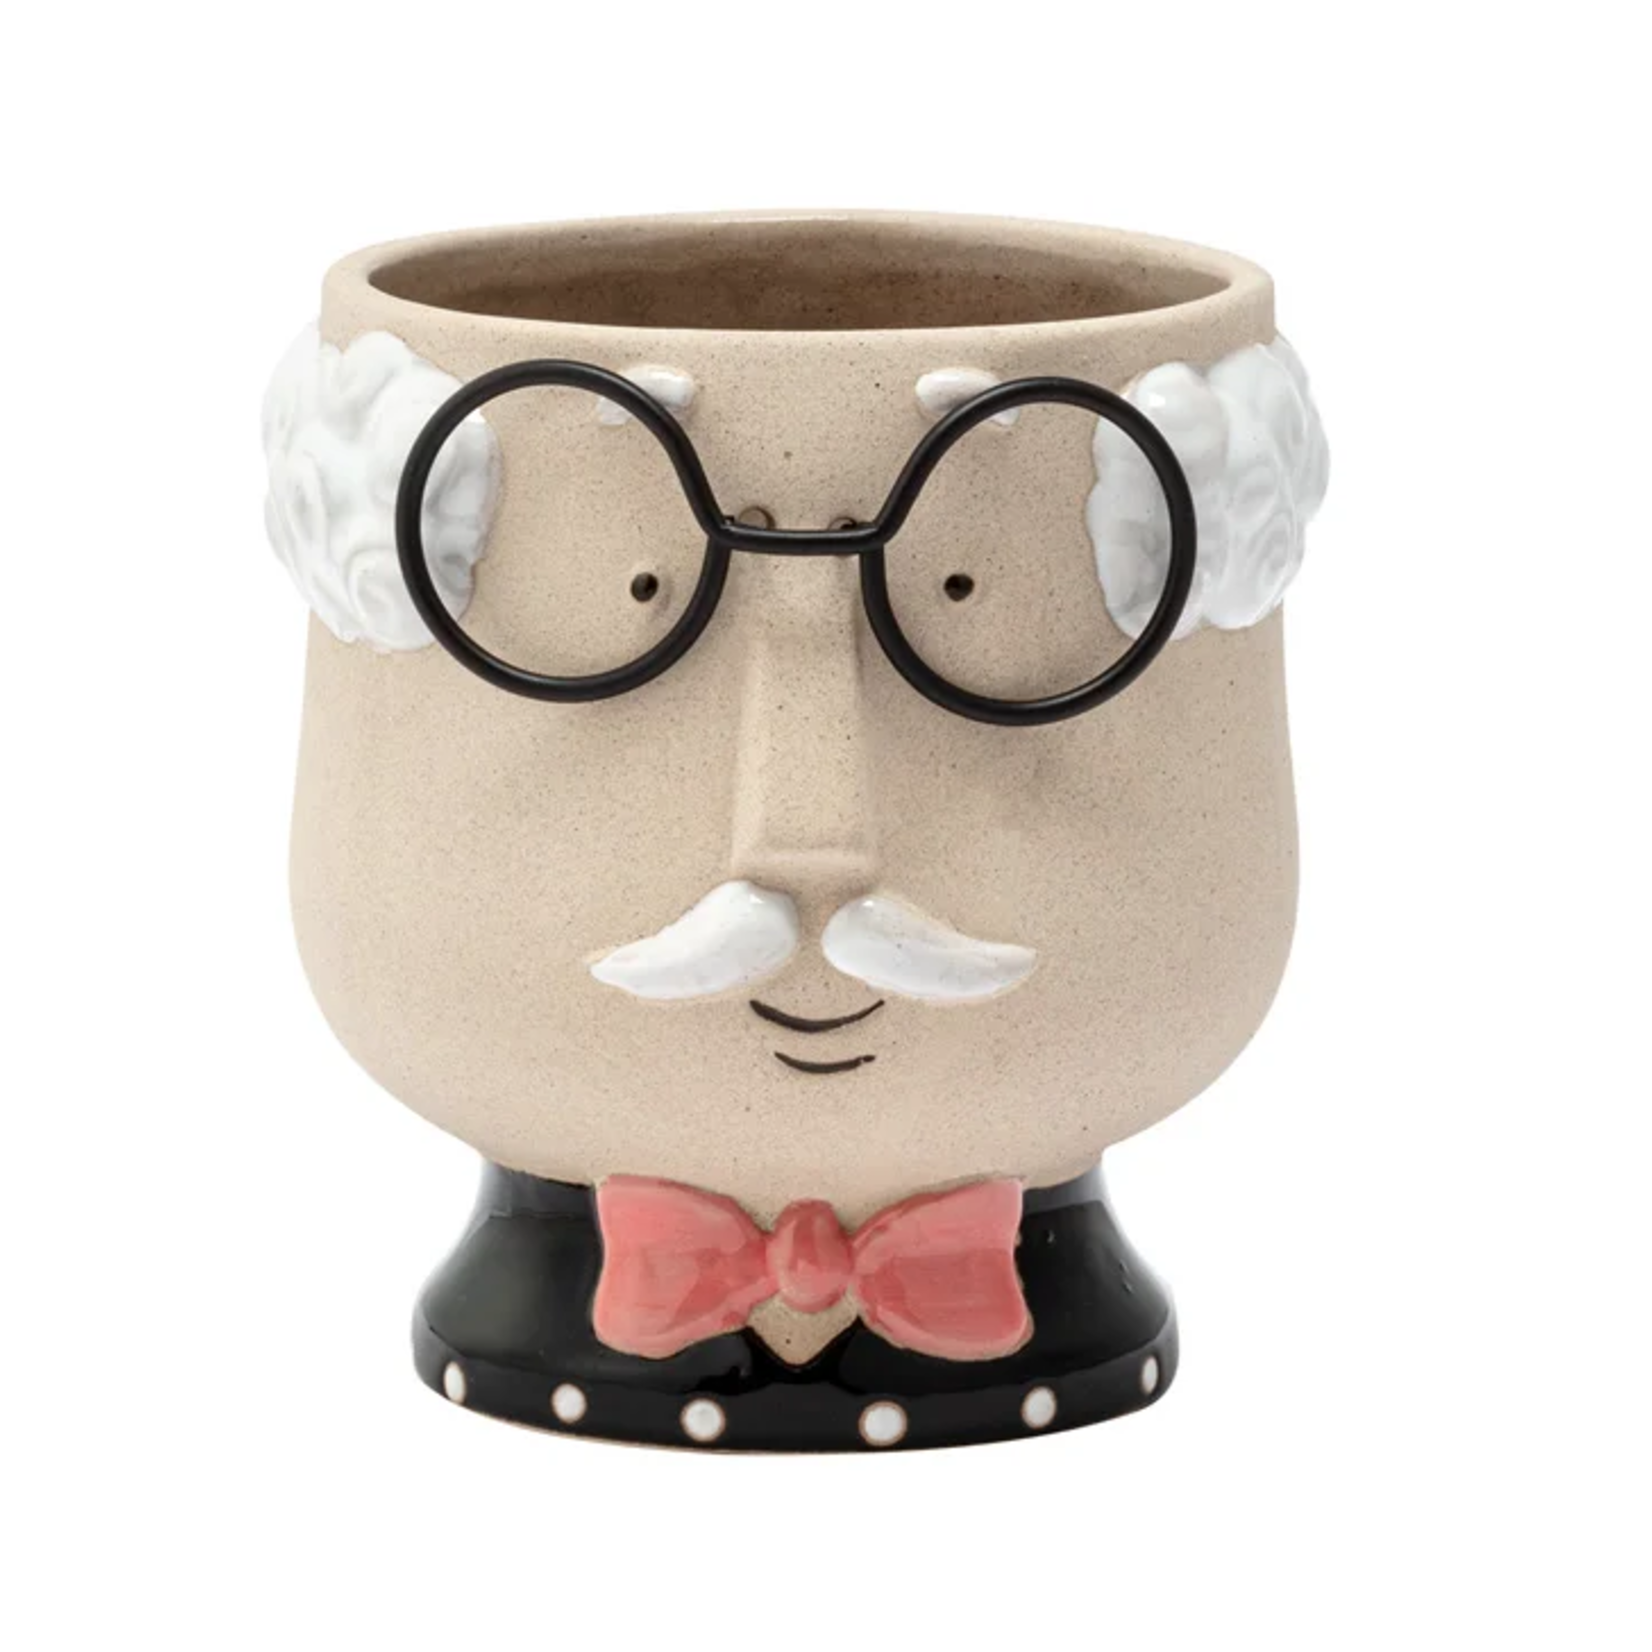 GLASSES AND BOW TIE HEAD PLANTER 3.75"LX3,75WX4.75H